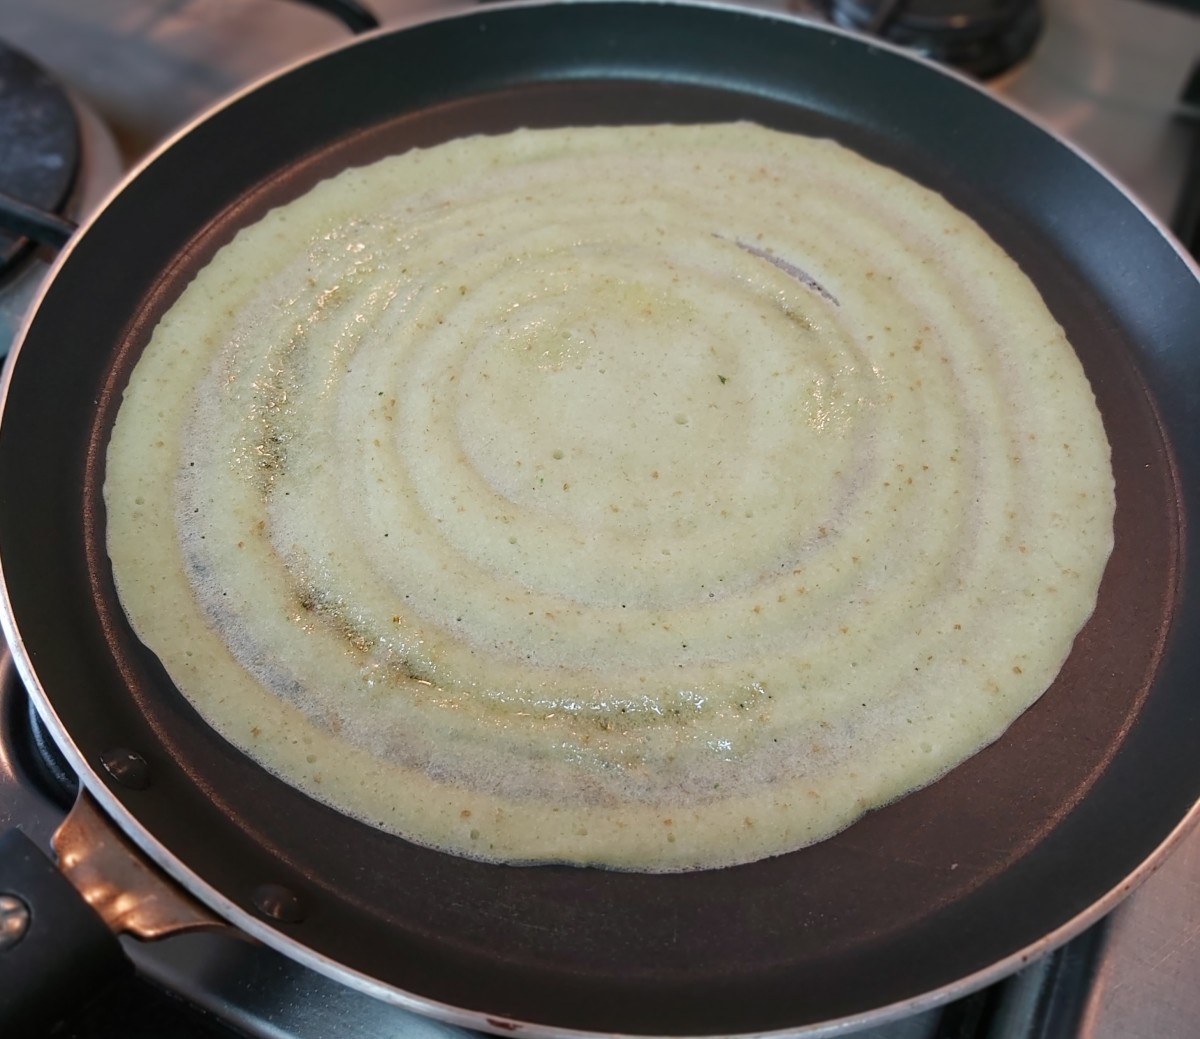 When the dosa is done, transfer it to a serving platter (add more cooking time for roast dosa). Repeat the same procedure with the remaining batter.